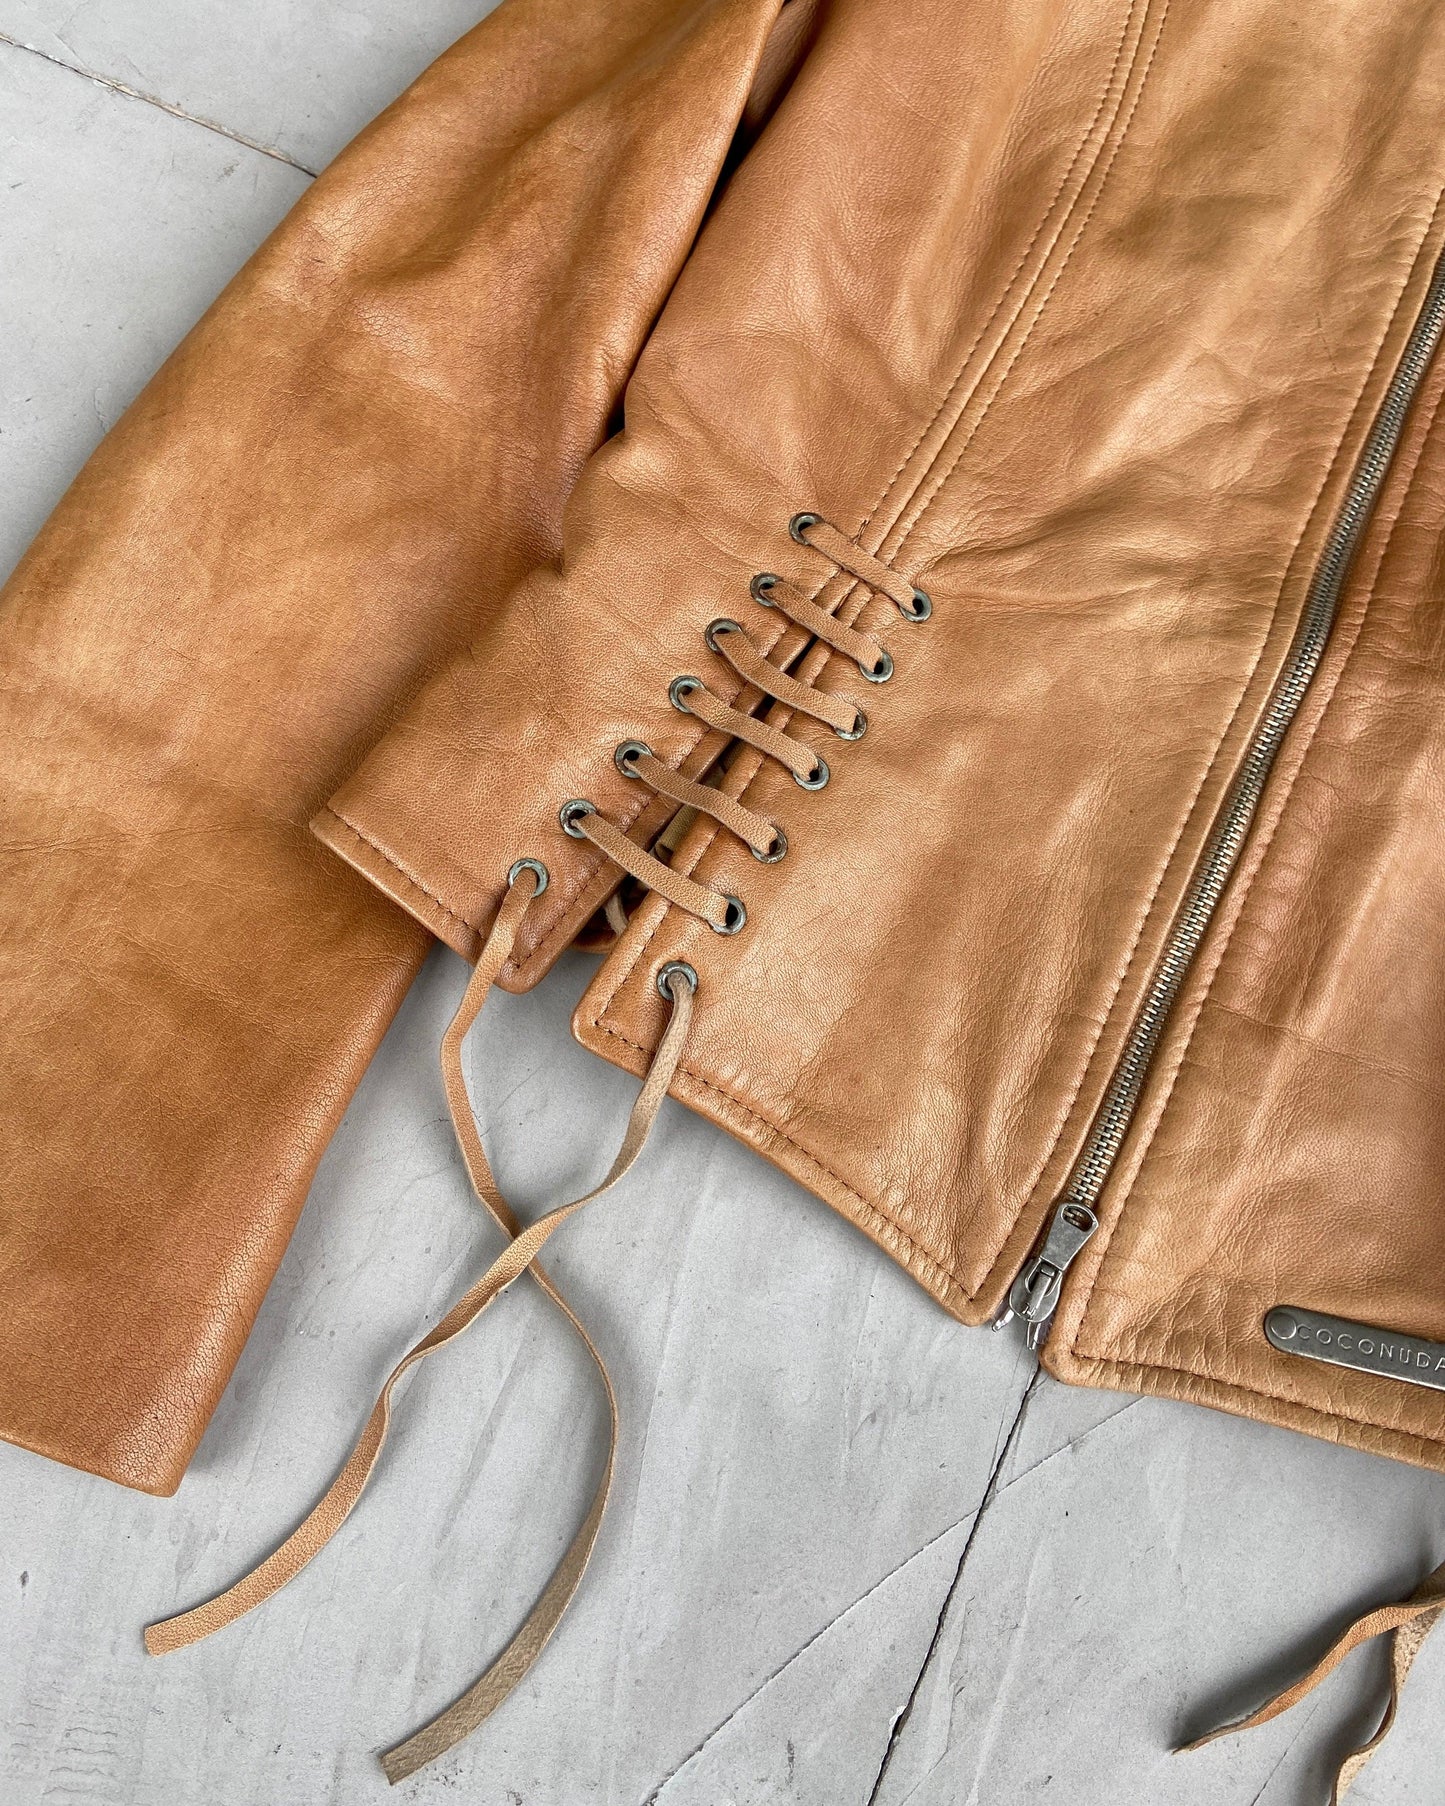 COCONUDA LEATHER LACE UP JACKET - S - Known Source